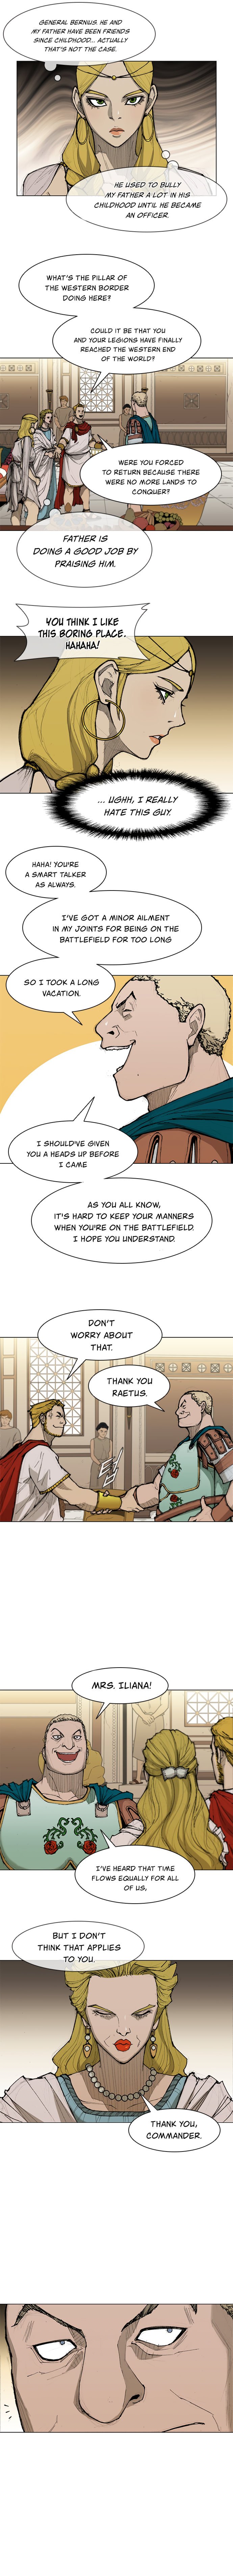 long-way-of-the-warrior-chap-32-1